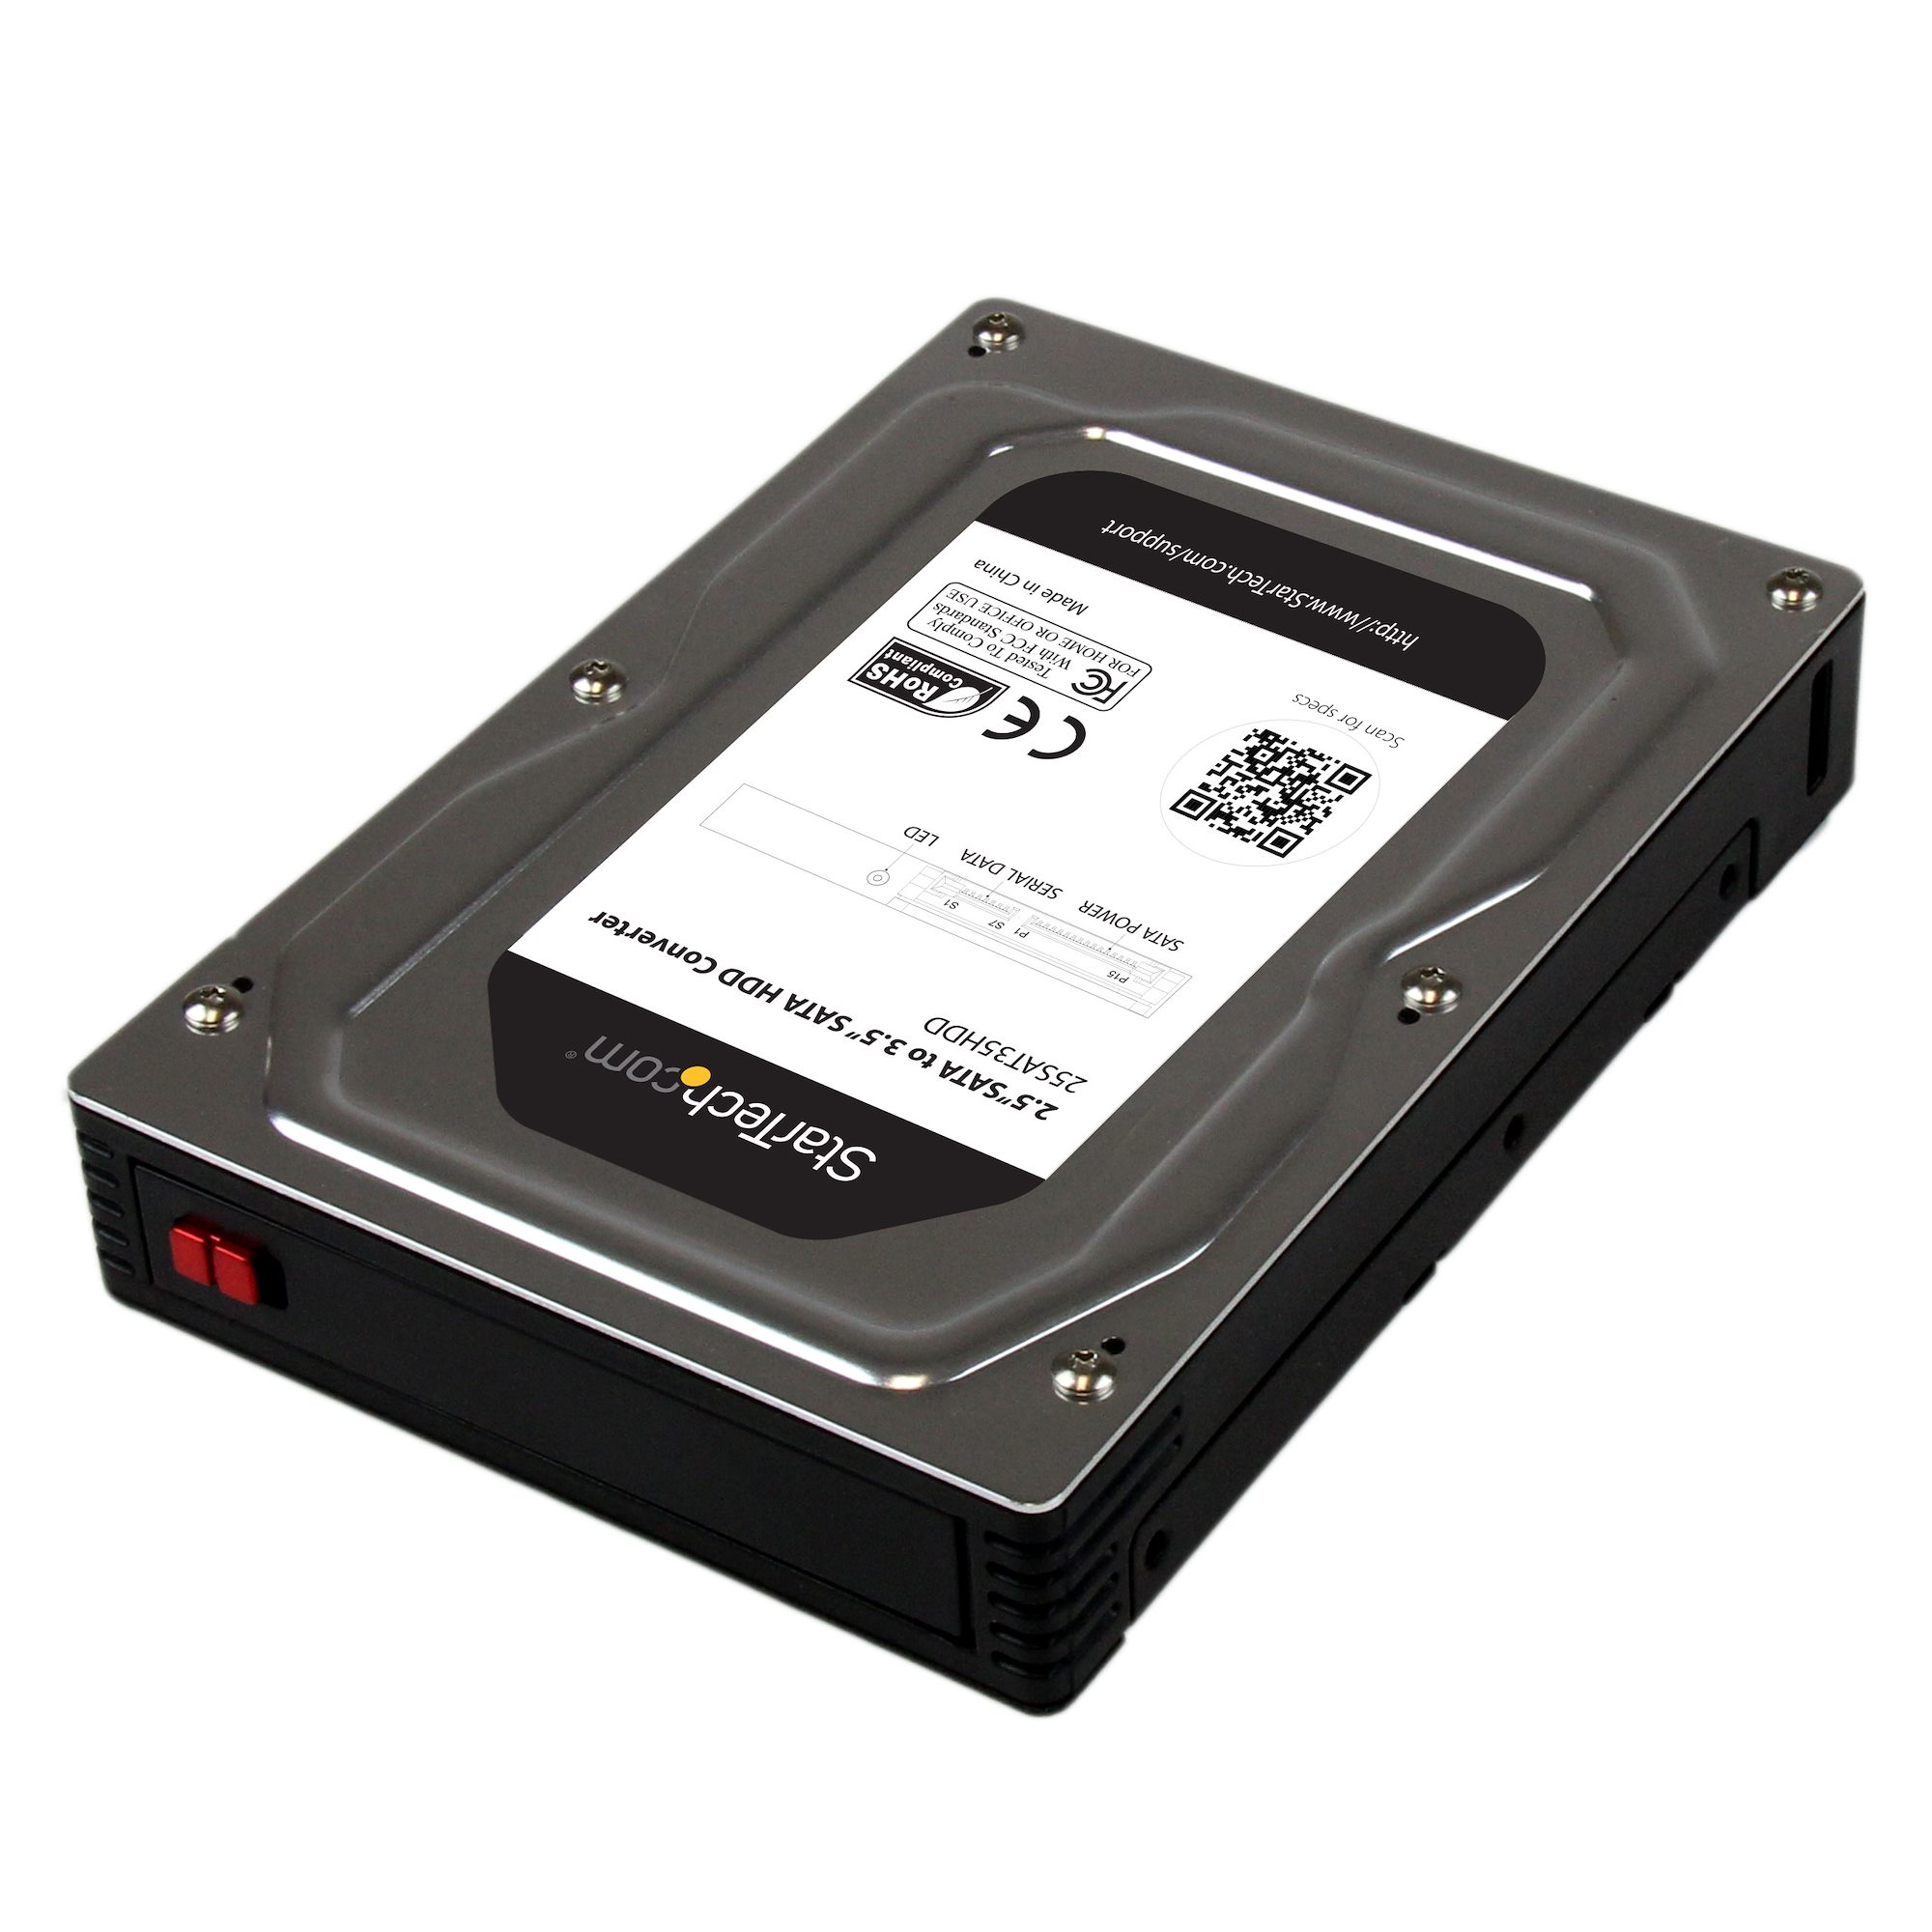 plantageejer manuskript Gøre en indsats 2.5” to 3.5” SATA HDD Adapter Enclosure - Drive Adapters and Drive  Converters | StarTech.com